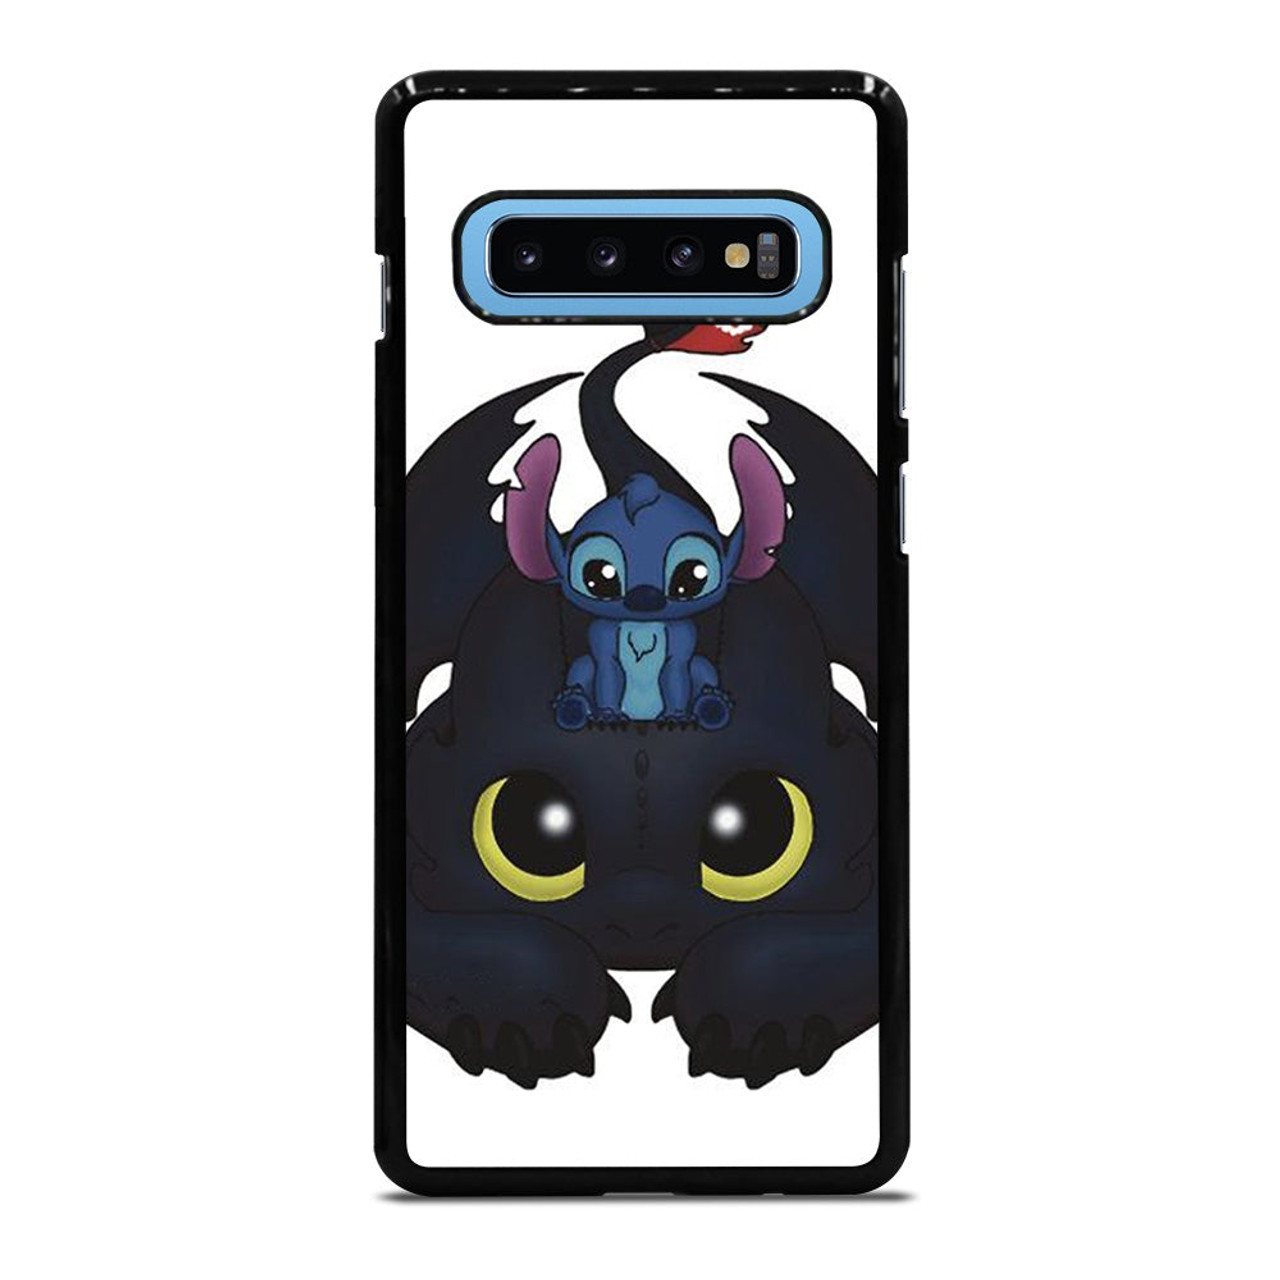 casing samsung s22 ultra anime - Buy casing samsung s22 ultra anime at Best  Price in Malaysia | h5.lazada.com.my